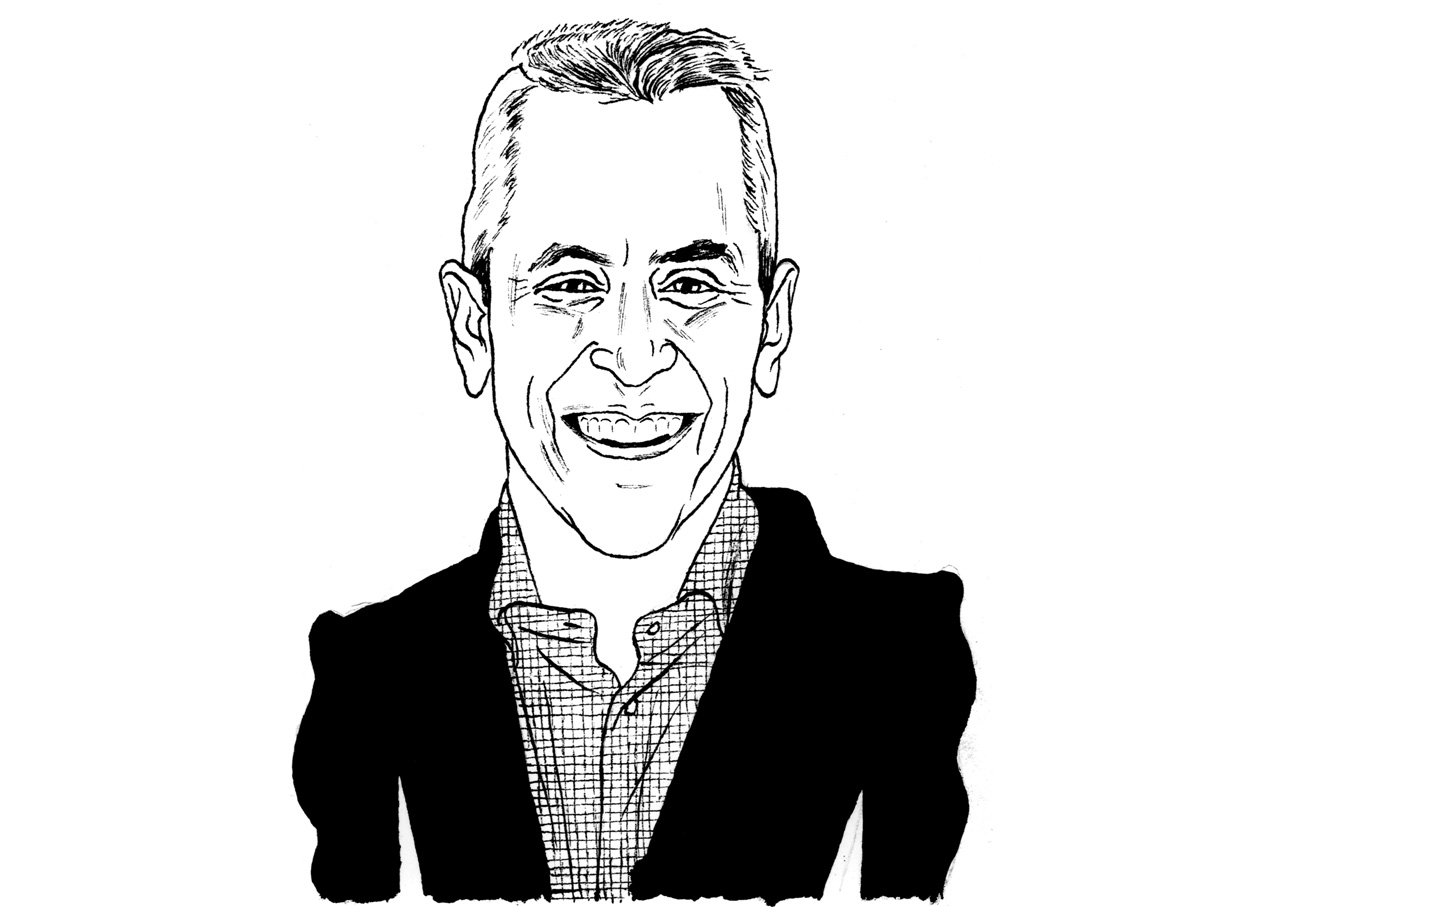 Danny Meyer Has a Few ‘Tips’ of His Own